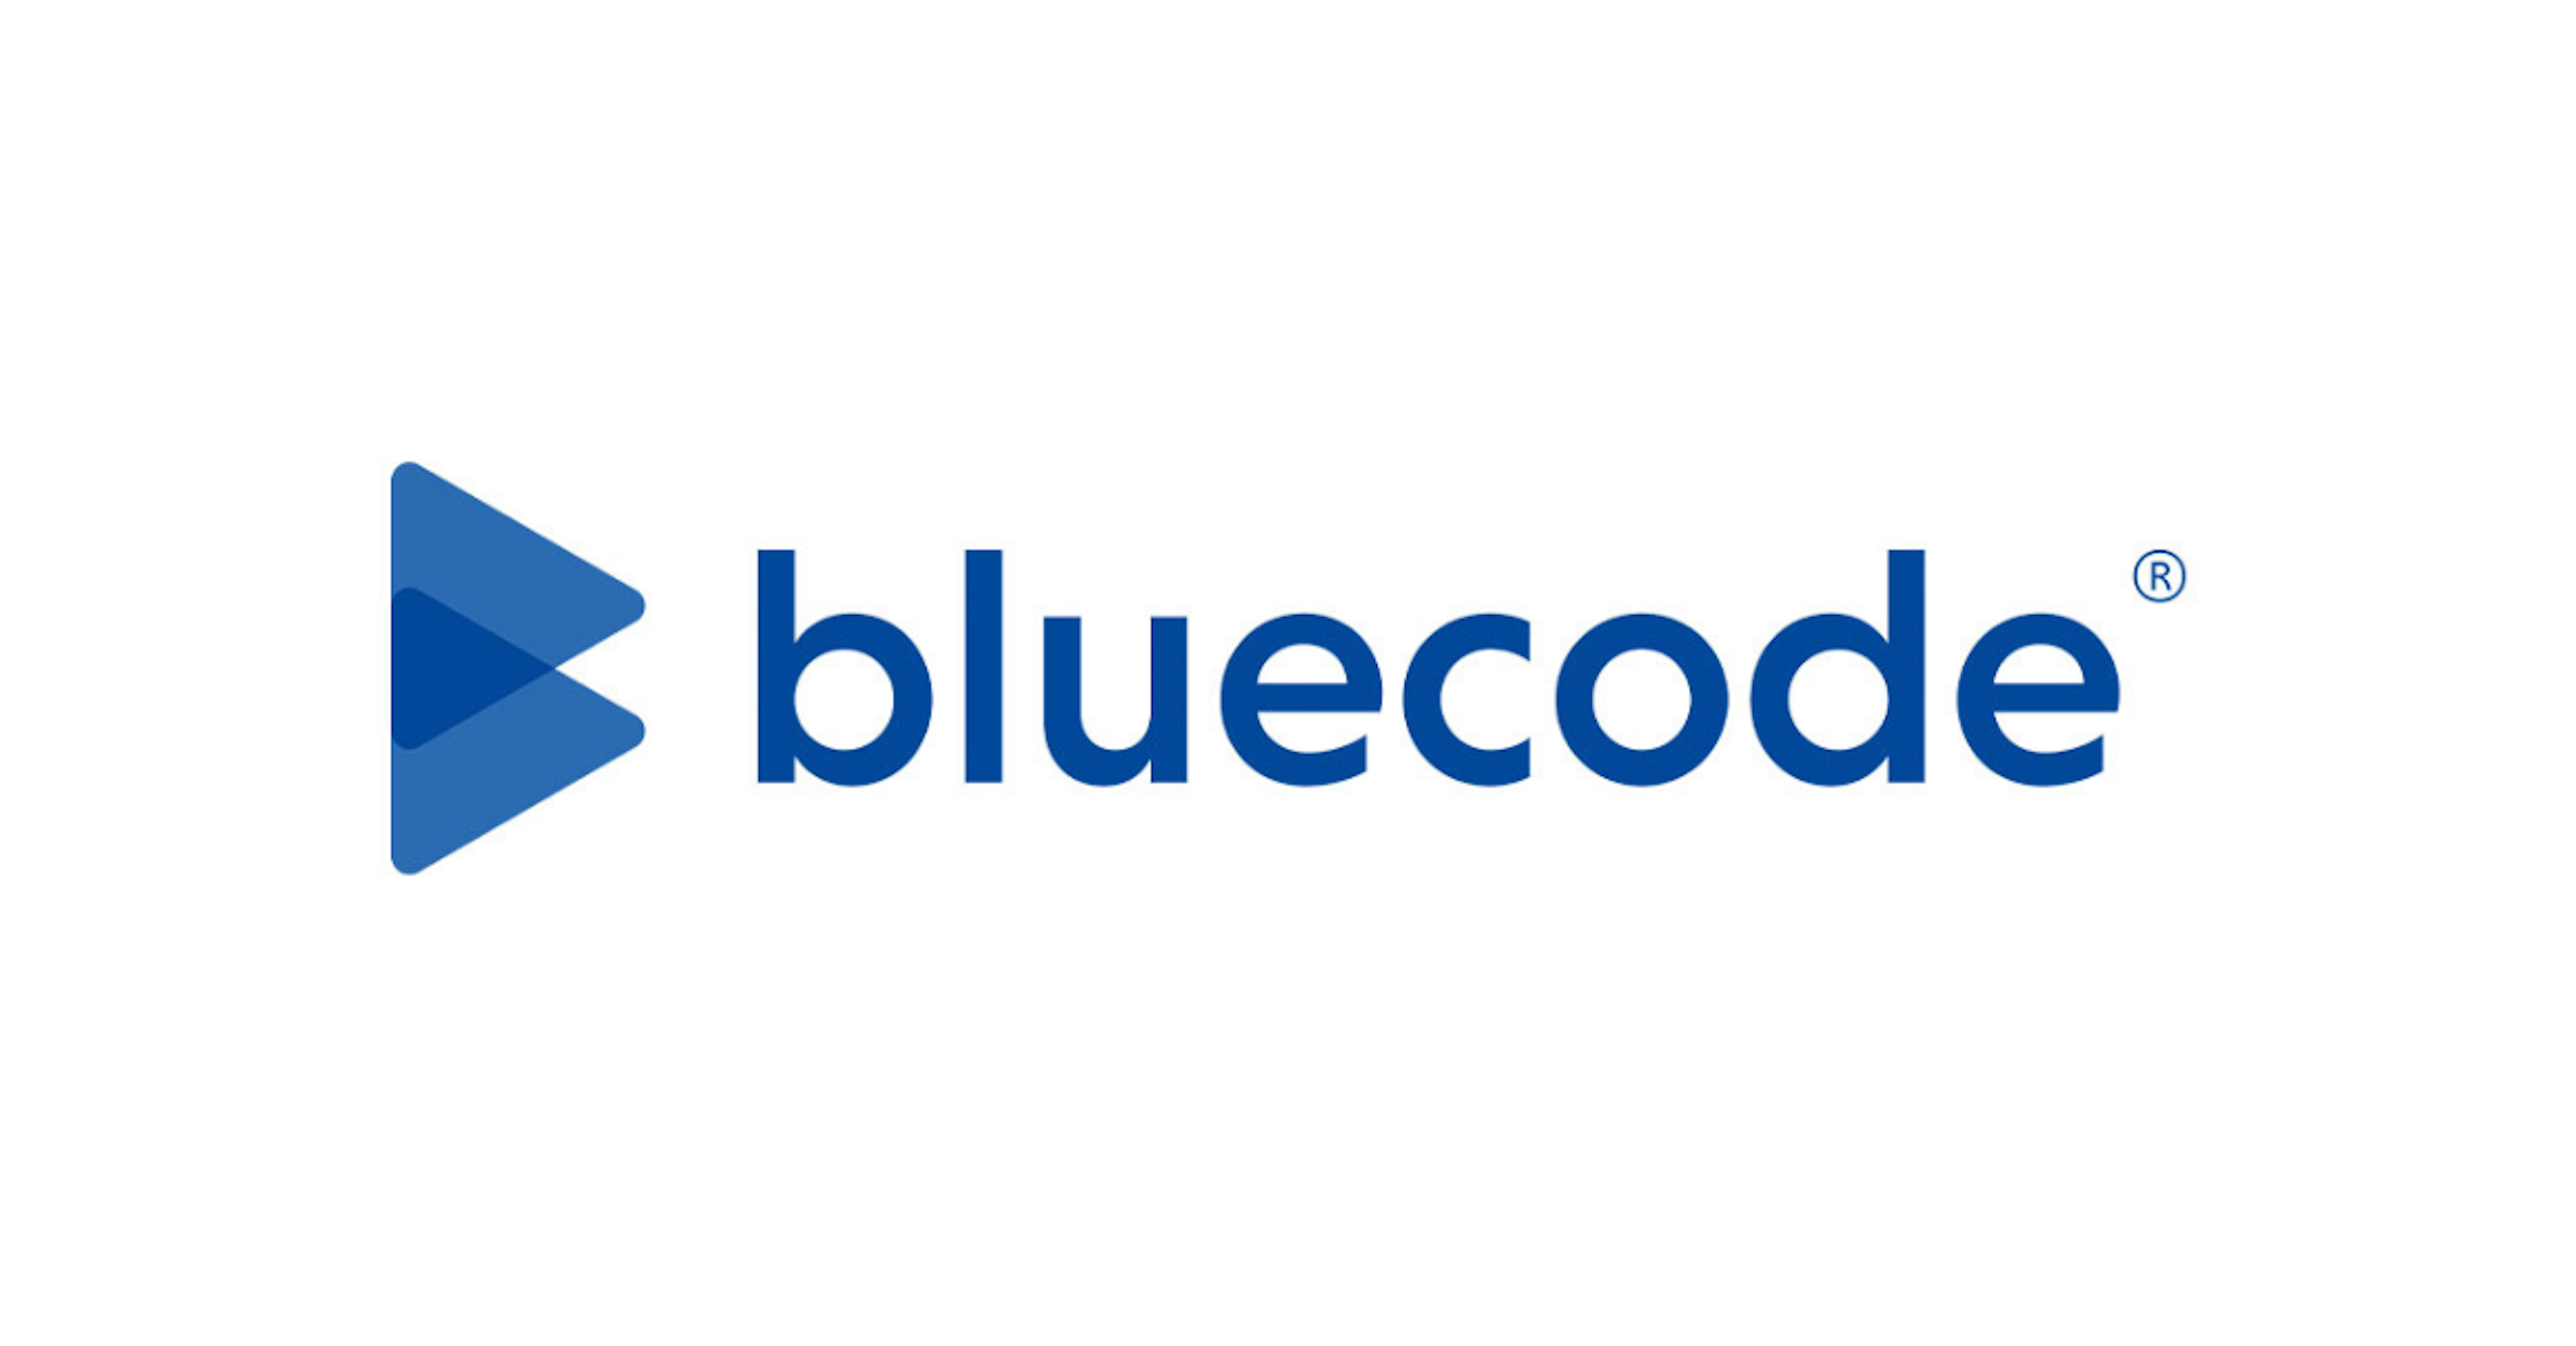 Functional Workplaces: Bluecode - Working on the Future of Mobile Payments